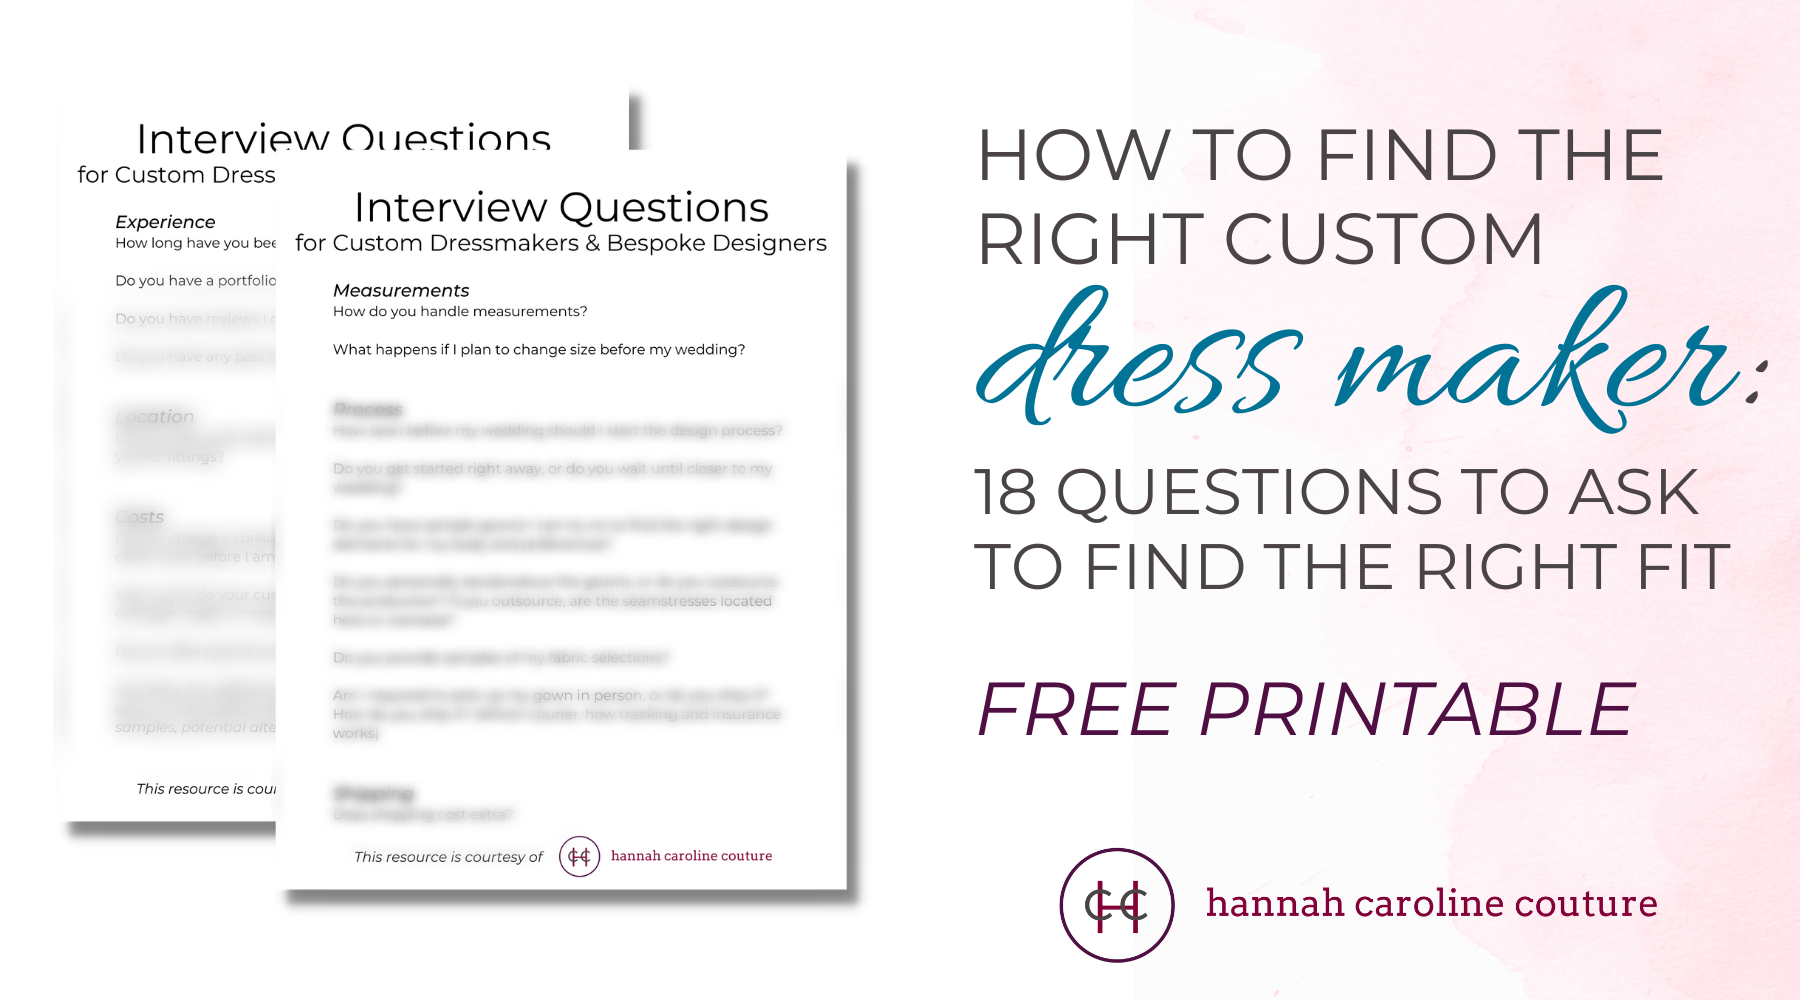 Custom Dressmaker Questions - How to Find the Right Custom Dress Maker